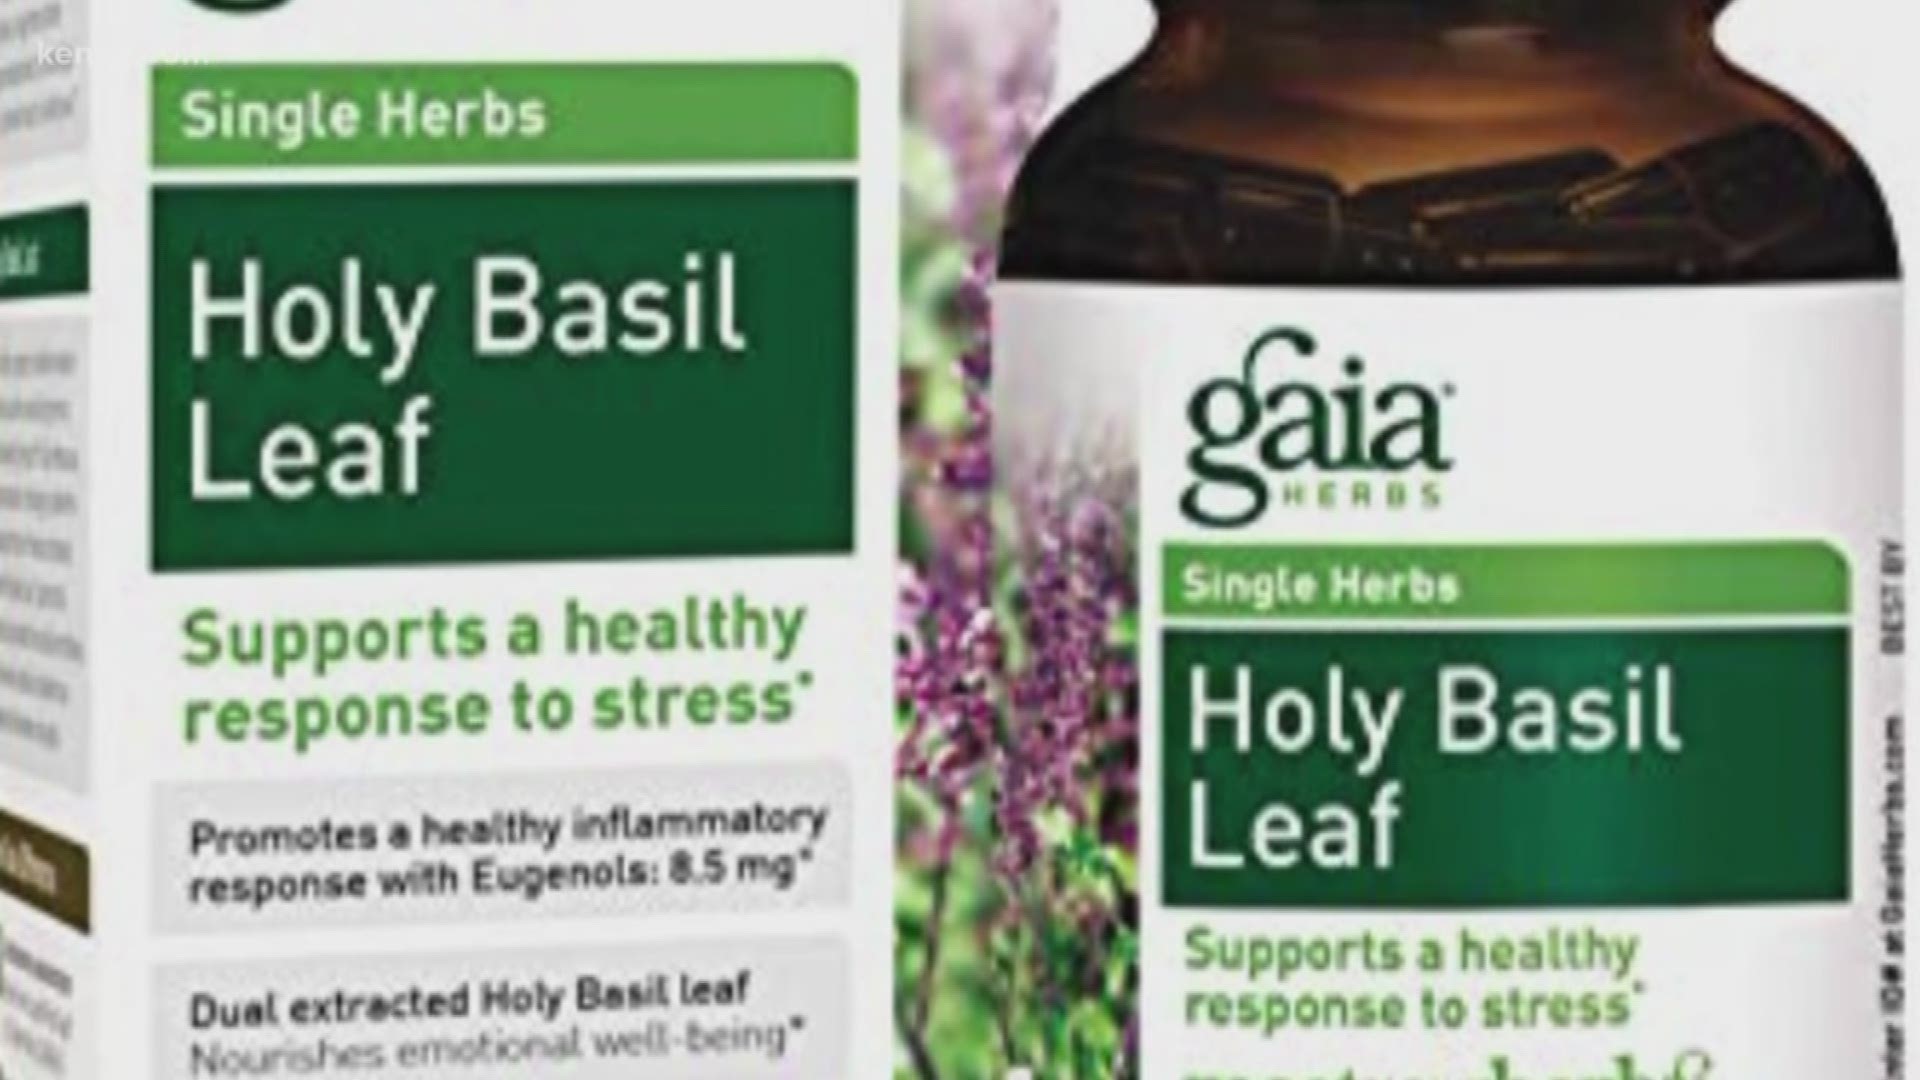 You most likely haven't heard of holy basil. Word on the street is: It's an excellent supplement in the kitchen and for relieving stress.